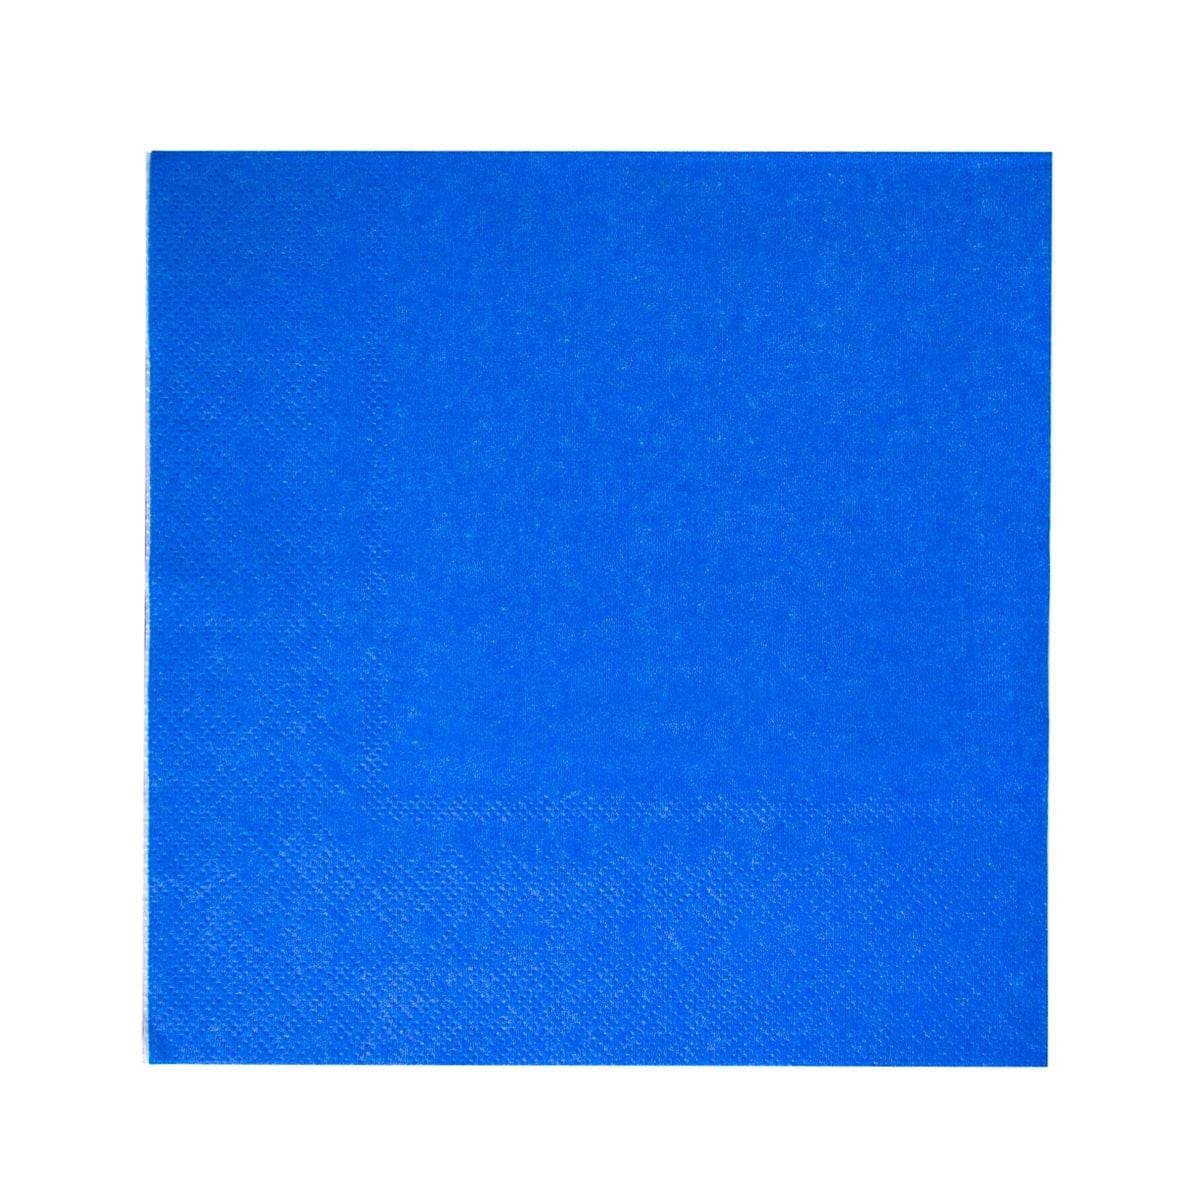 YIWU SANDY PAPER PRODUCTS CO., LTD Everyday Entertaining Royal blue Lunch Napkins, 16 Count